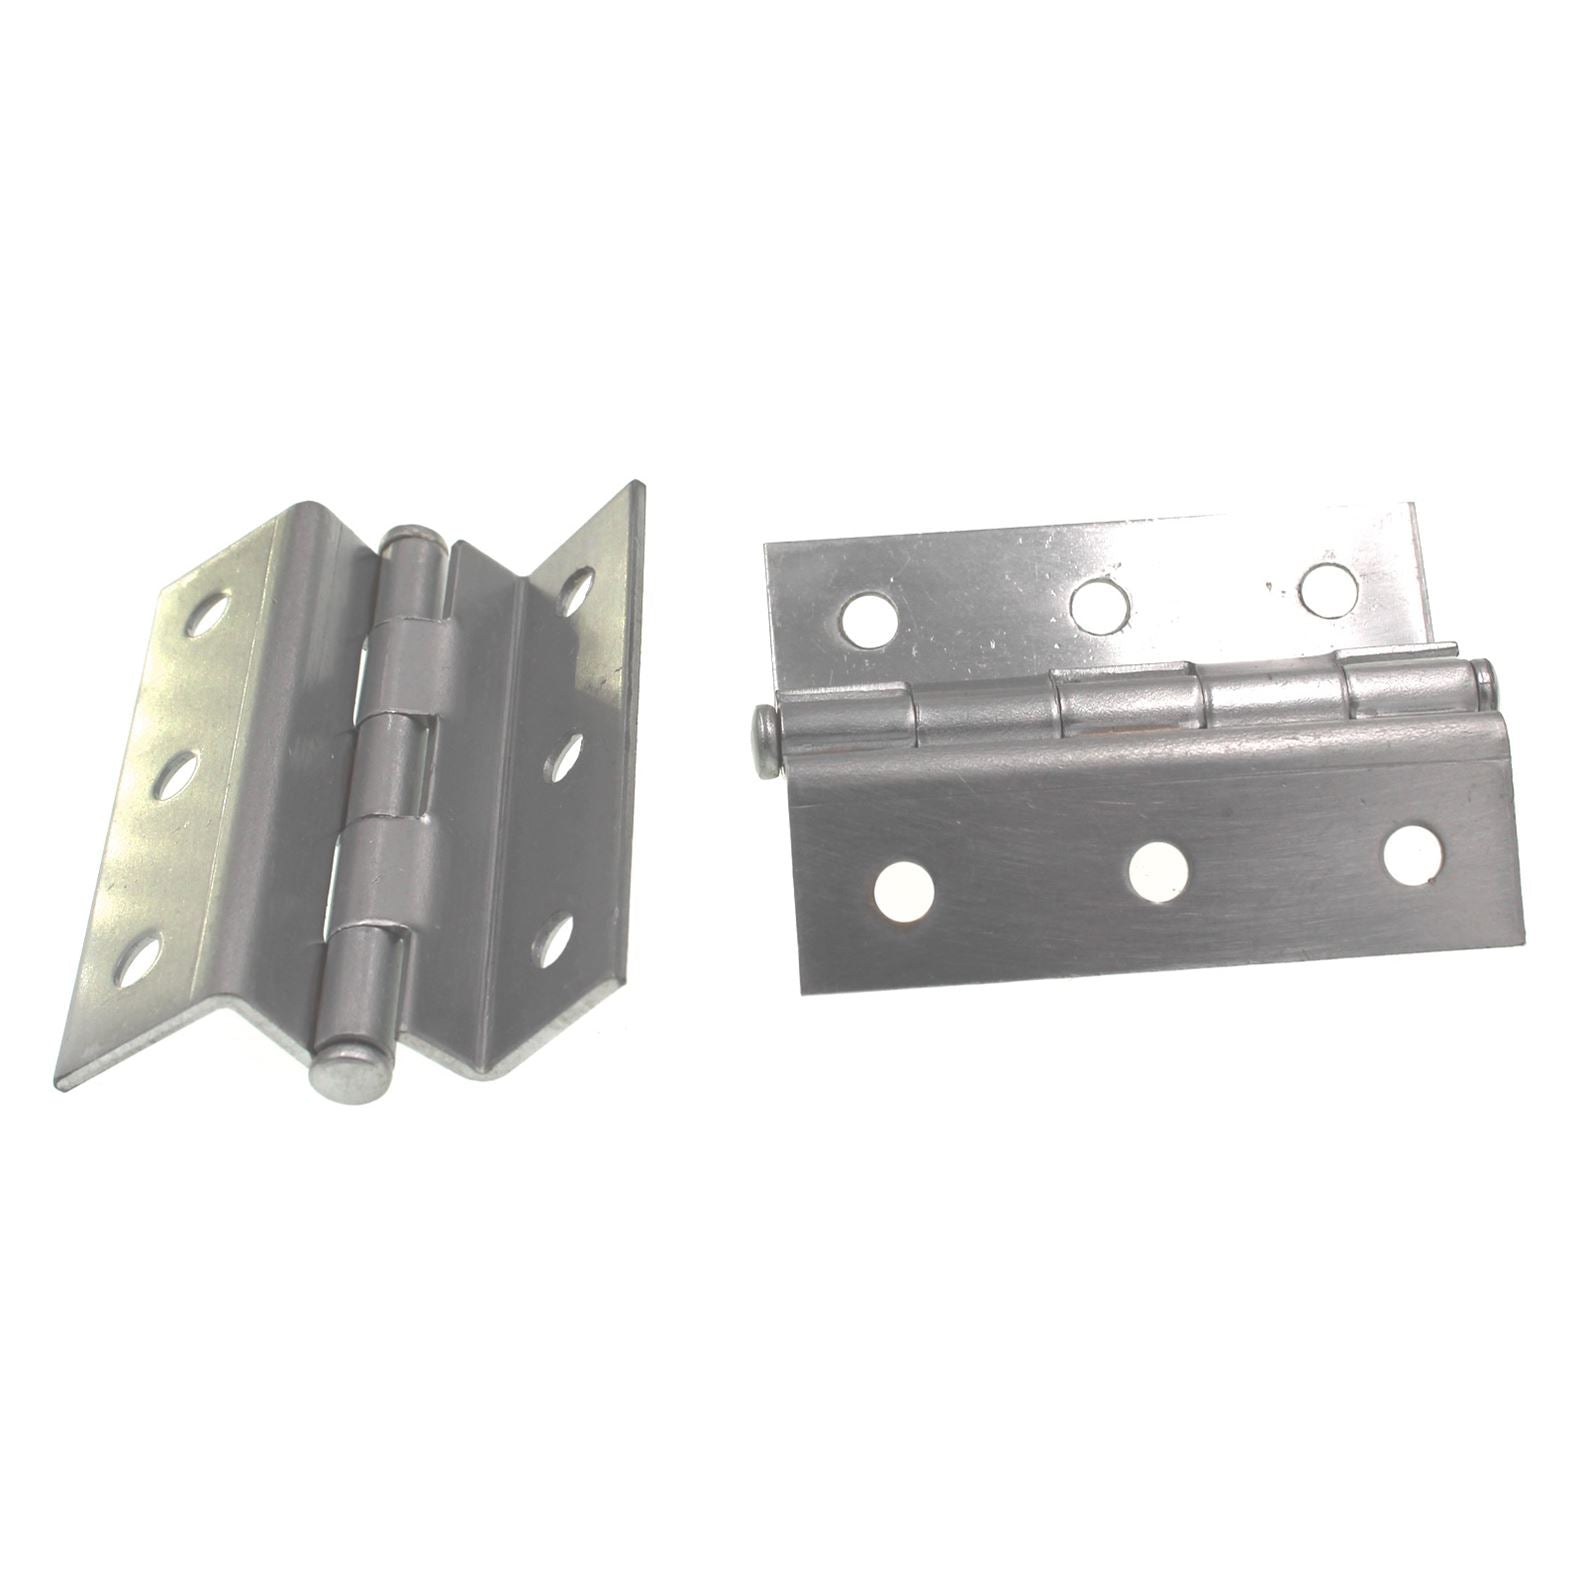 Pair Lawrence Satin Chrome Full Inset Cabinet Hinges For 1/4" Door SC1228-A-DCHR